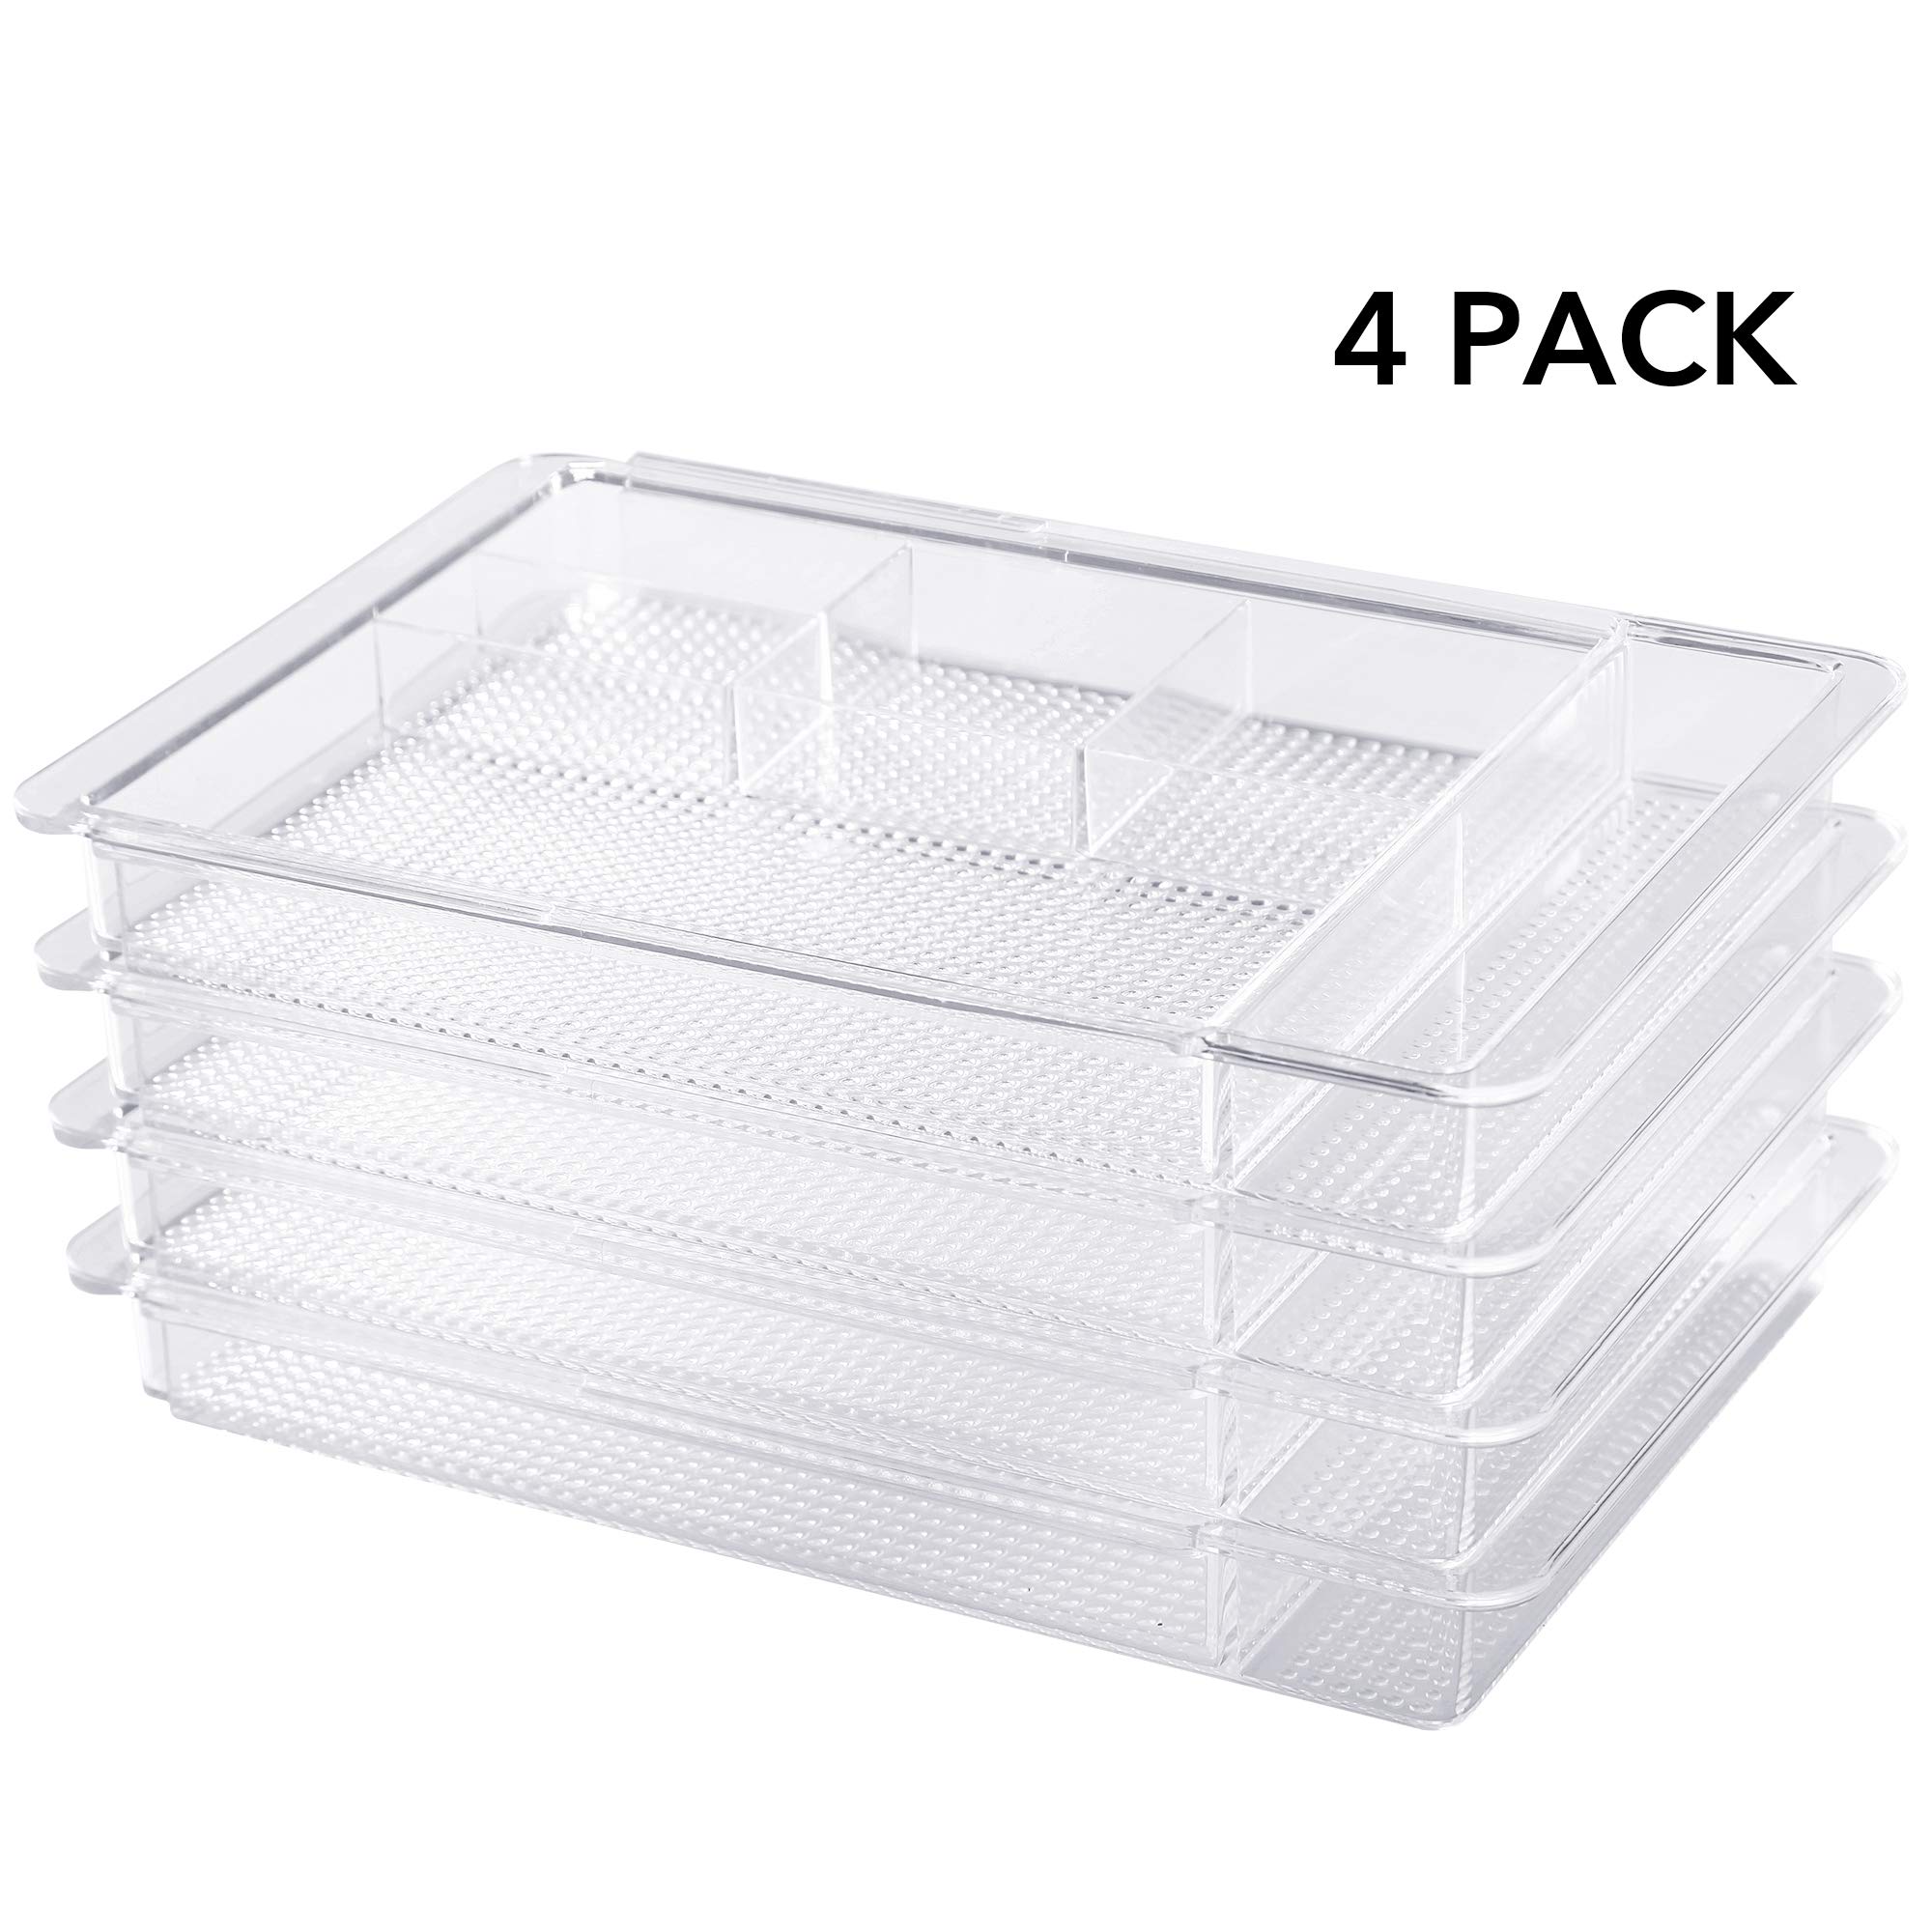 Oubonun Expandable Drawer Organizer 11.1” to 19.2” Width, Shallow Cosmetic Organizer 1.3” Height, 4 Packs, Clear Plastic Storage Trays for Dressing Table,Bathroom